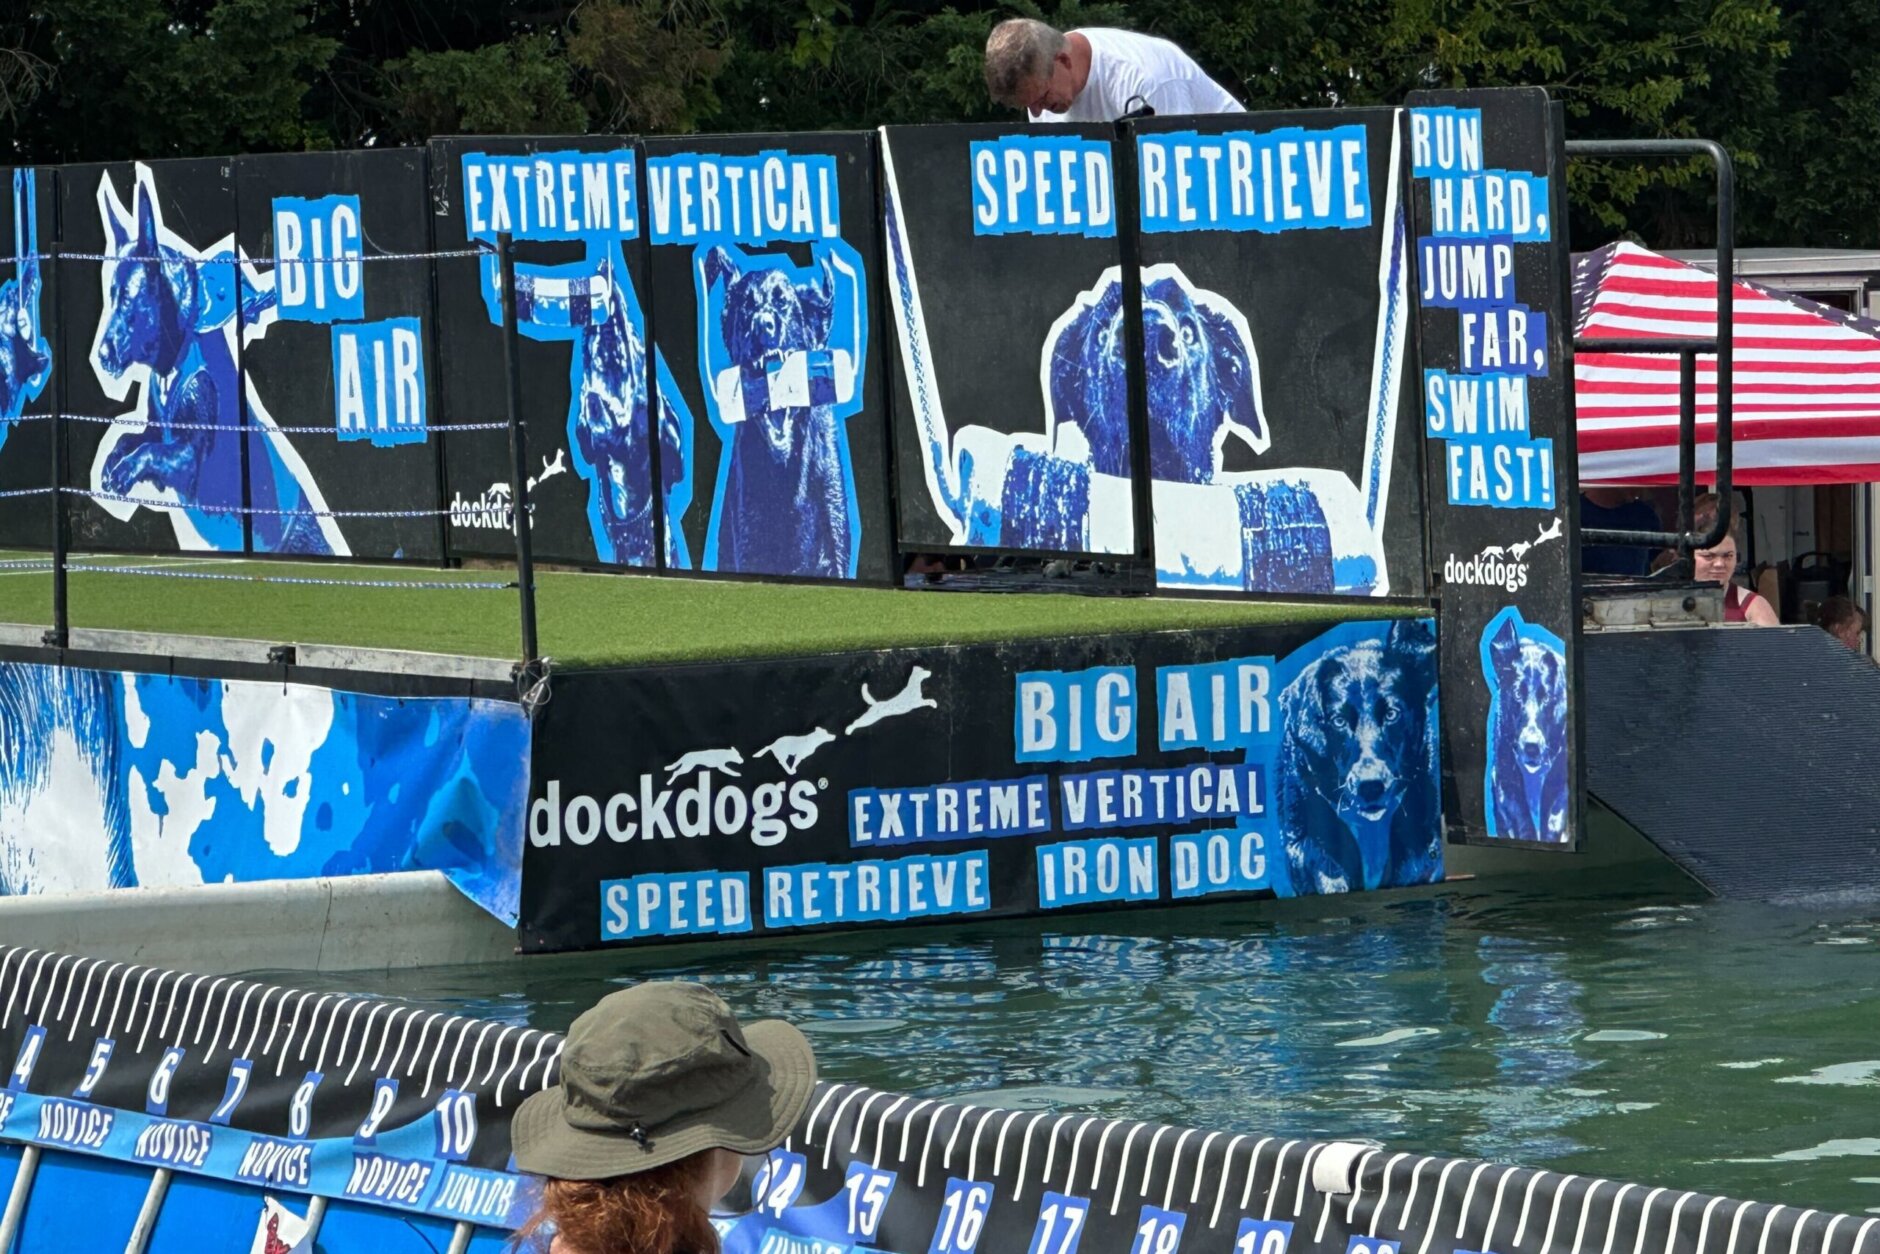 The setup for the dockdogs jumping competition Montgomery County Agriculture Fair (WTOP/Matt Kaufax)